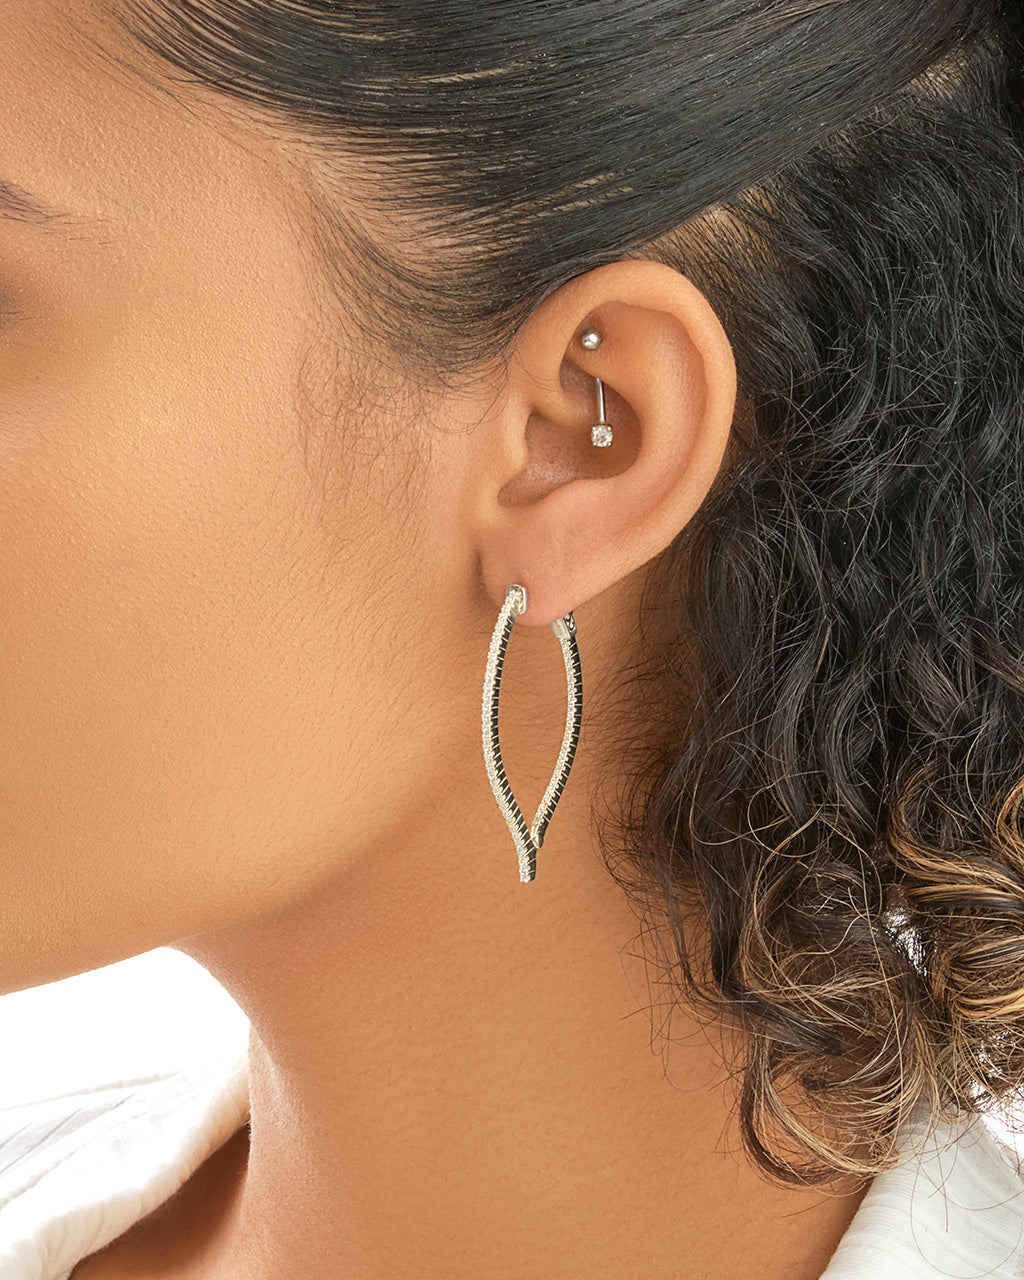 Your Ear Piercing Cheatsheet For The Perfectly Curated Earring Stack